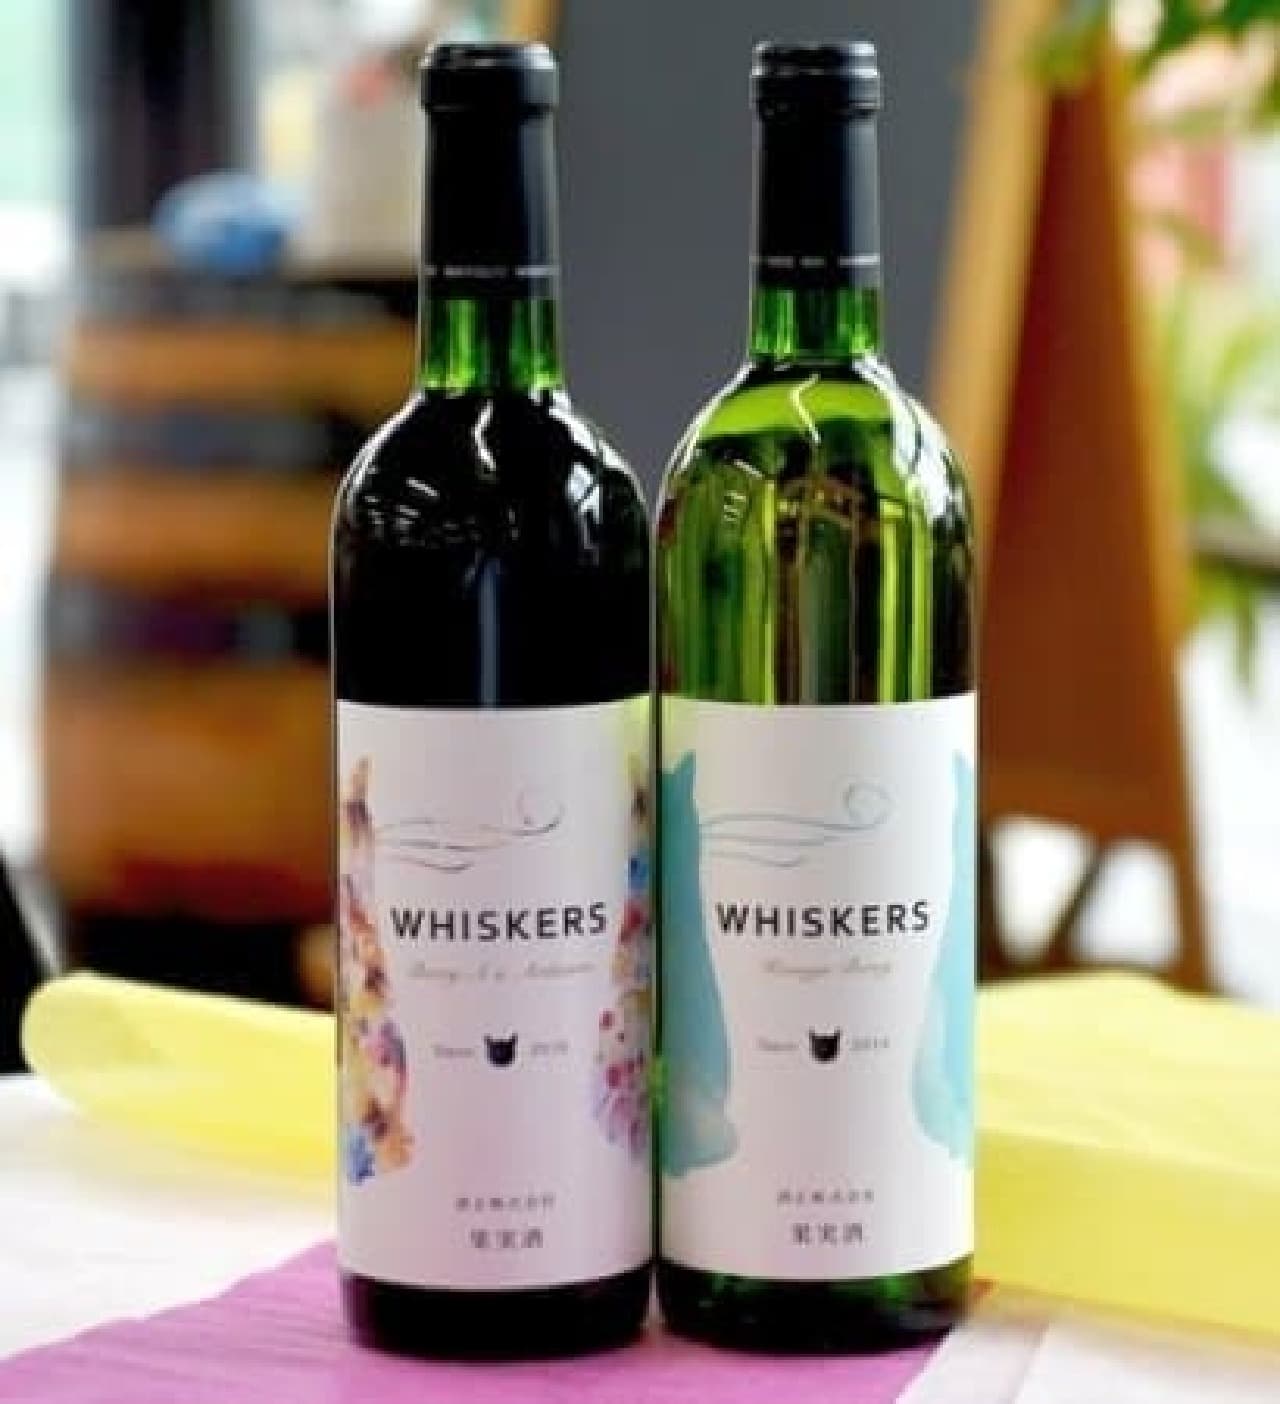 Cat label wine "Whiskers"